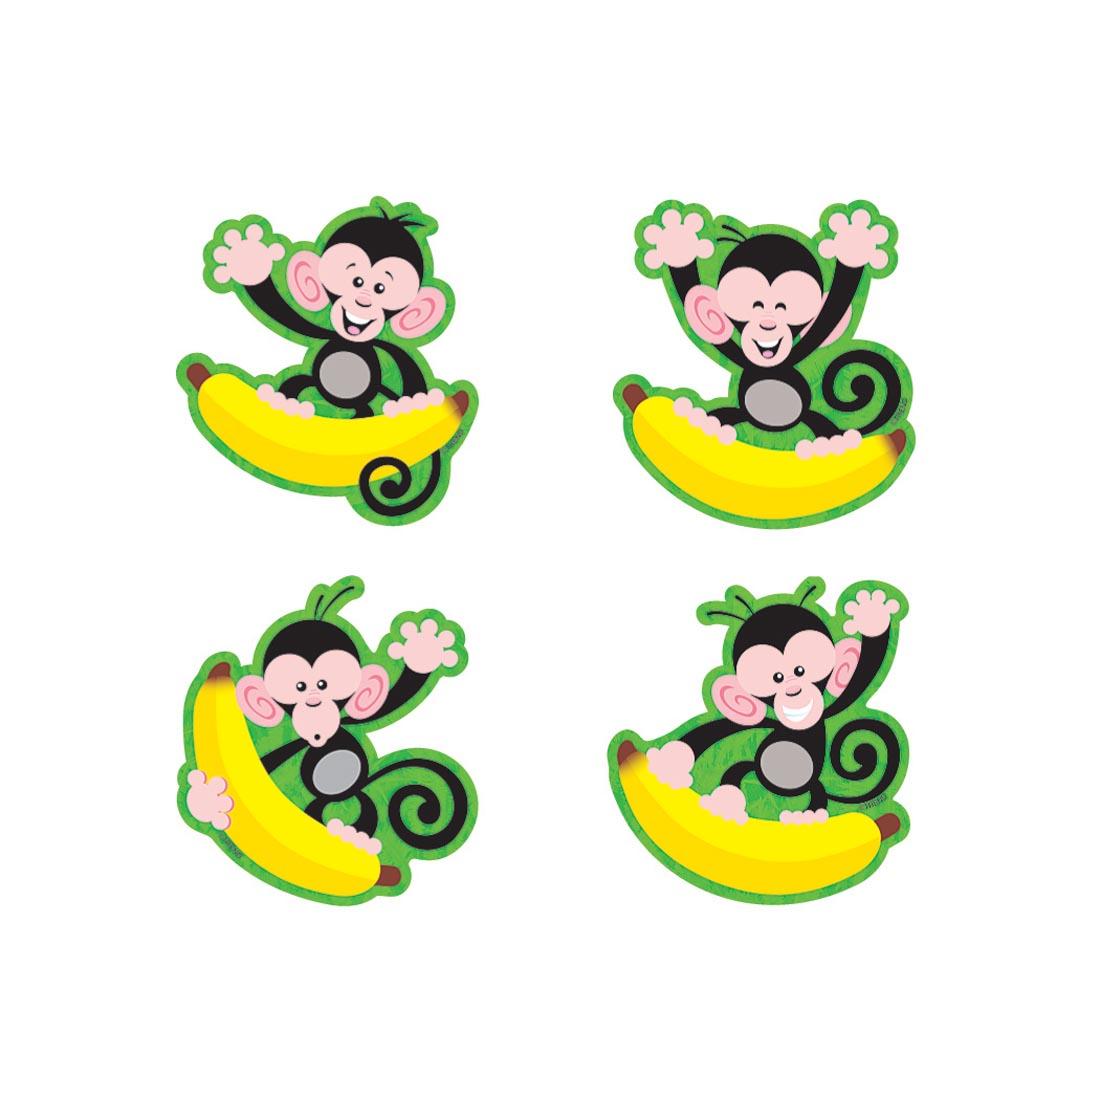 Four TREND Monkeys and Bananas Mini Accents